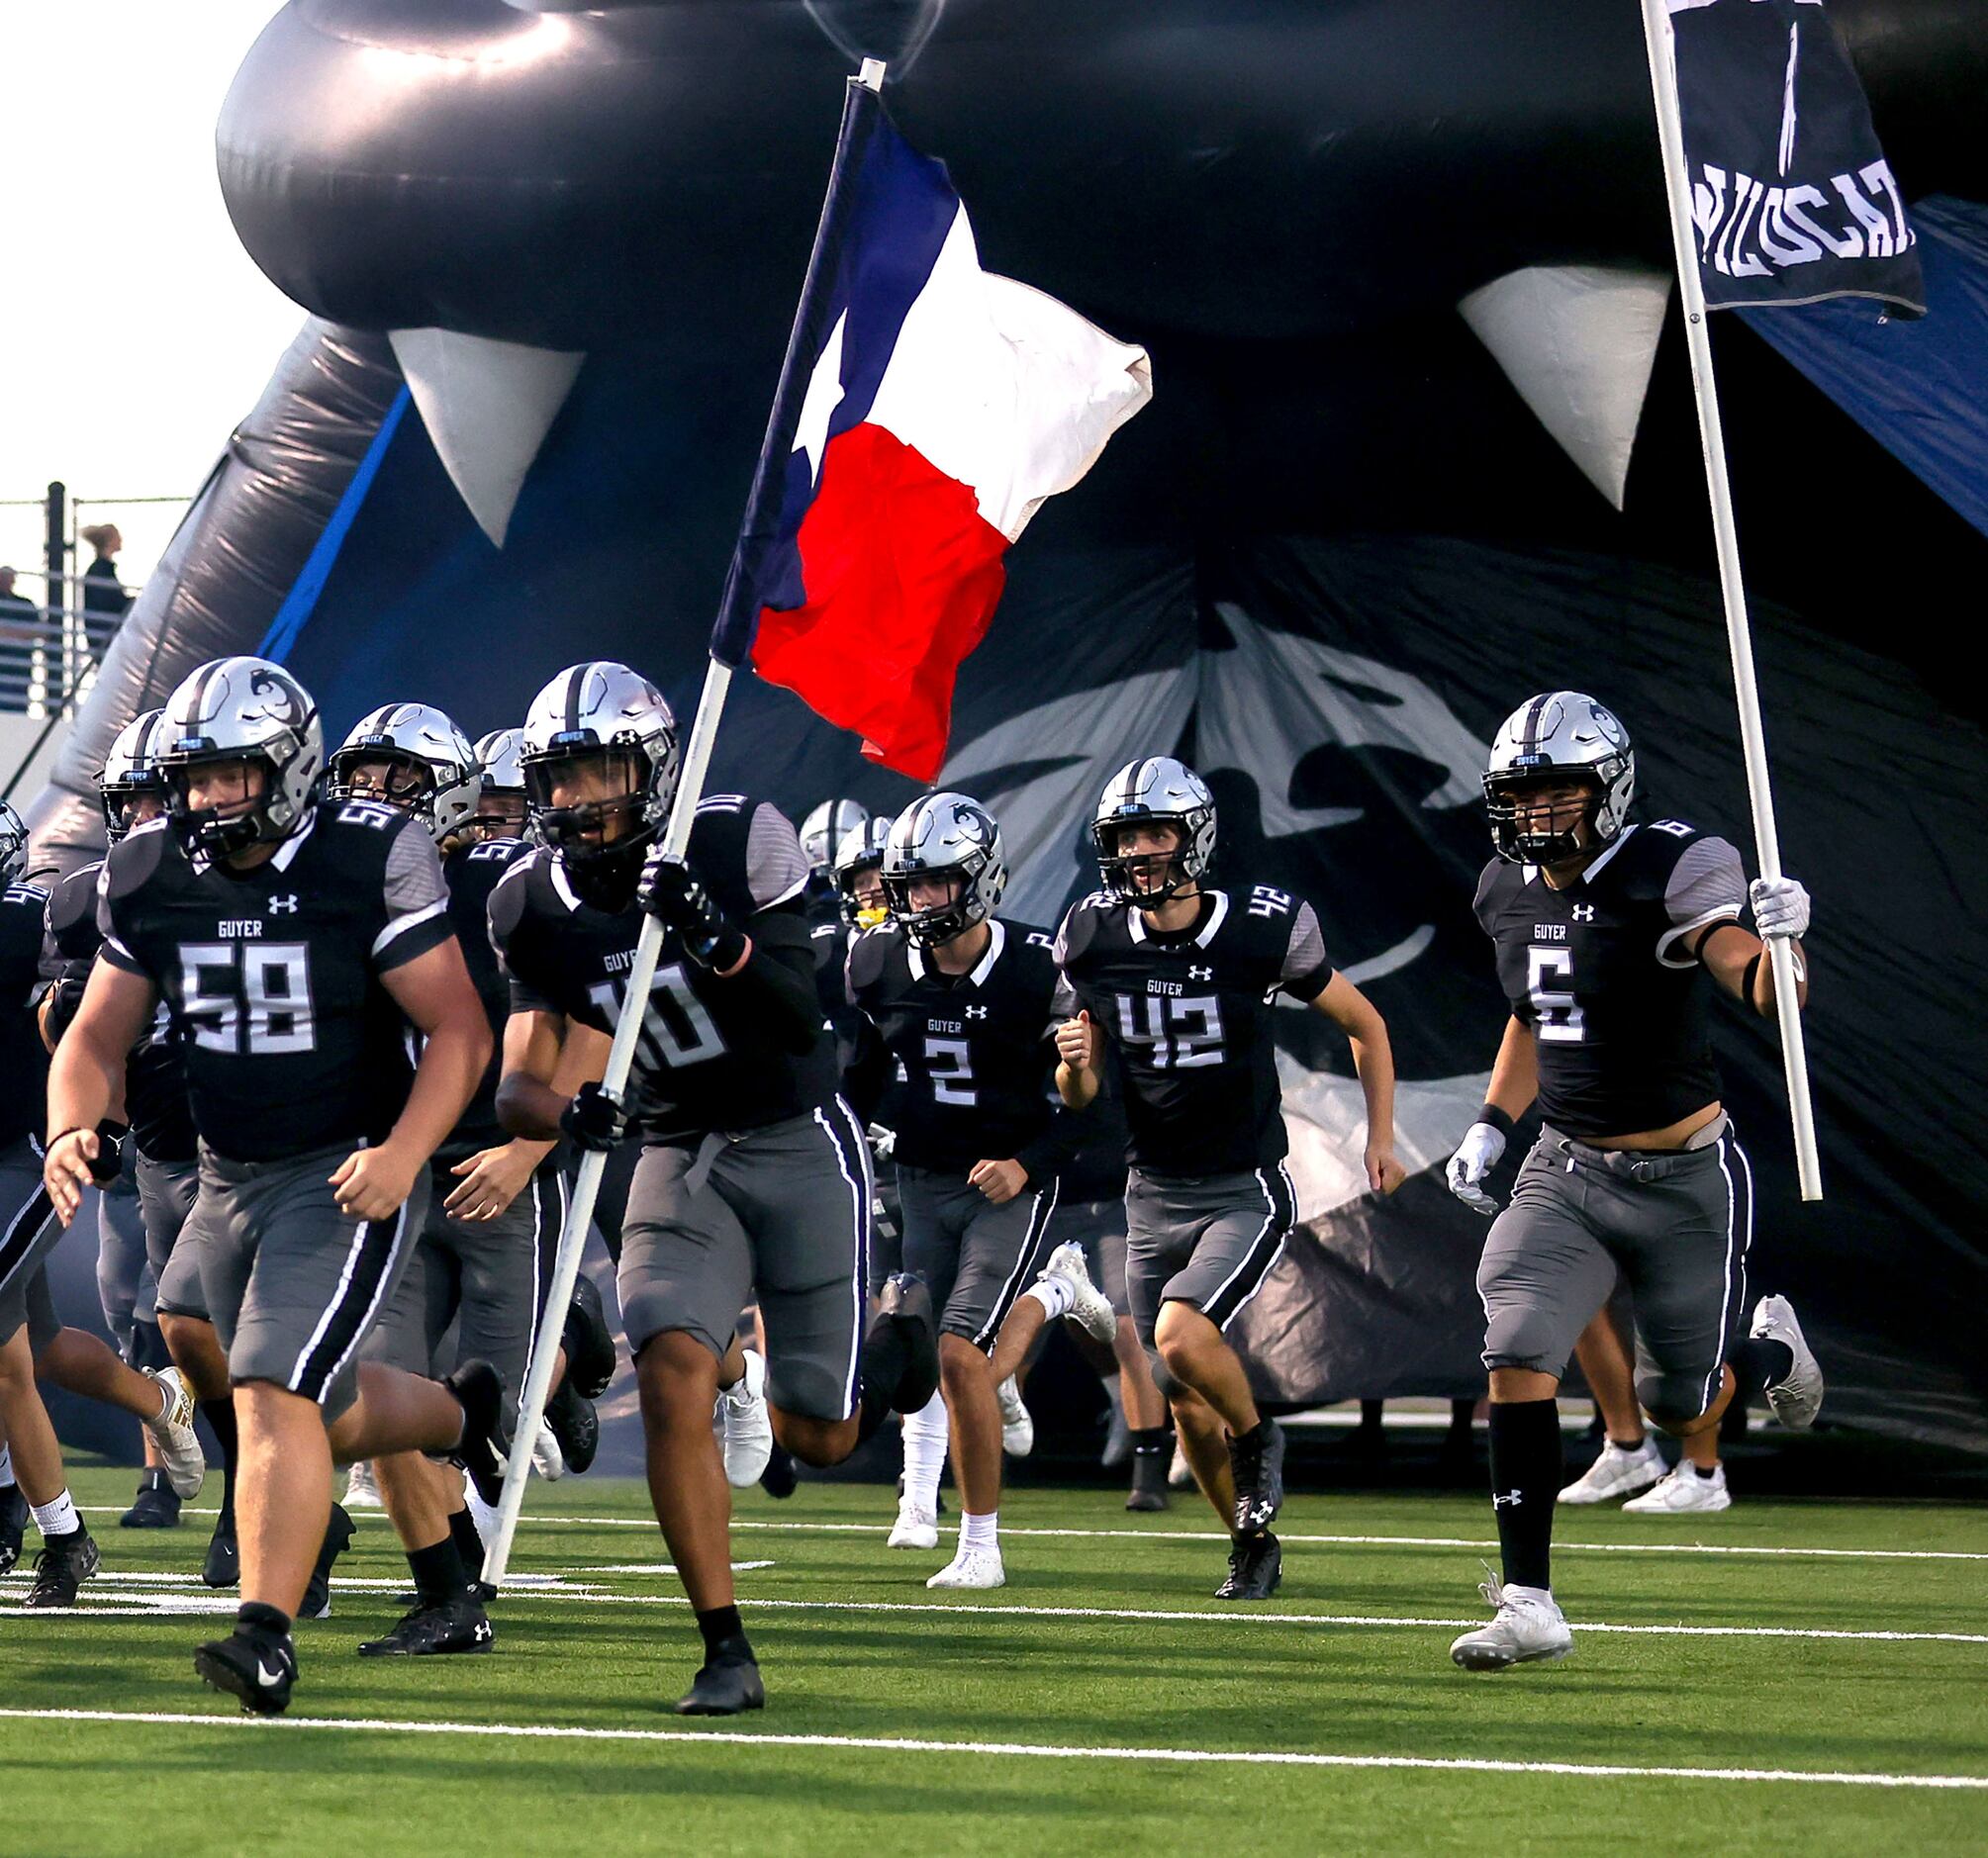 The Denton Guyer Wildcats enter the field to face Allen in a District 5-6A high school...